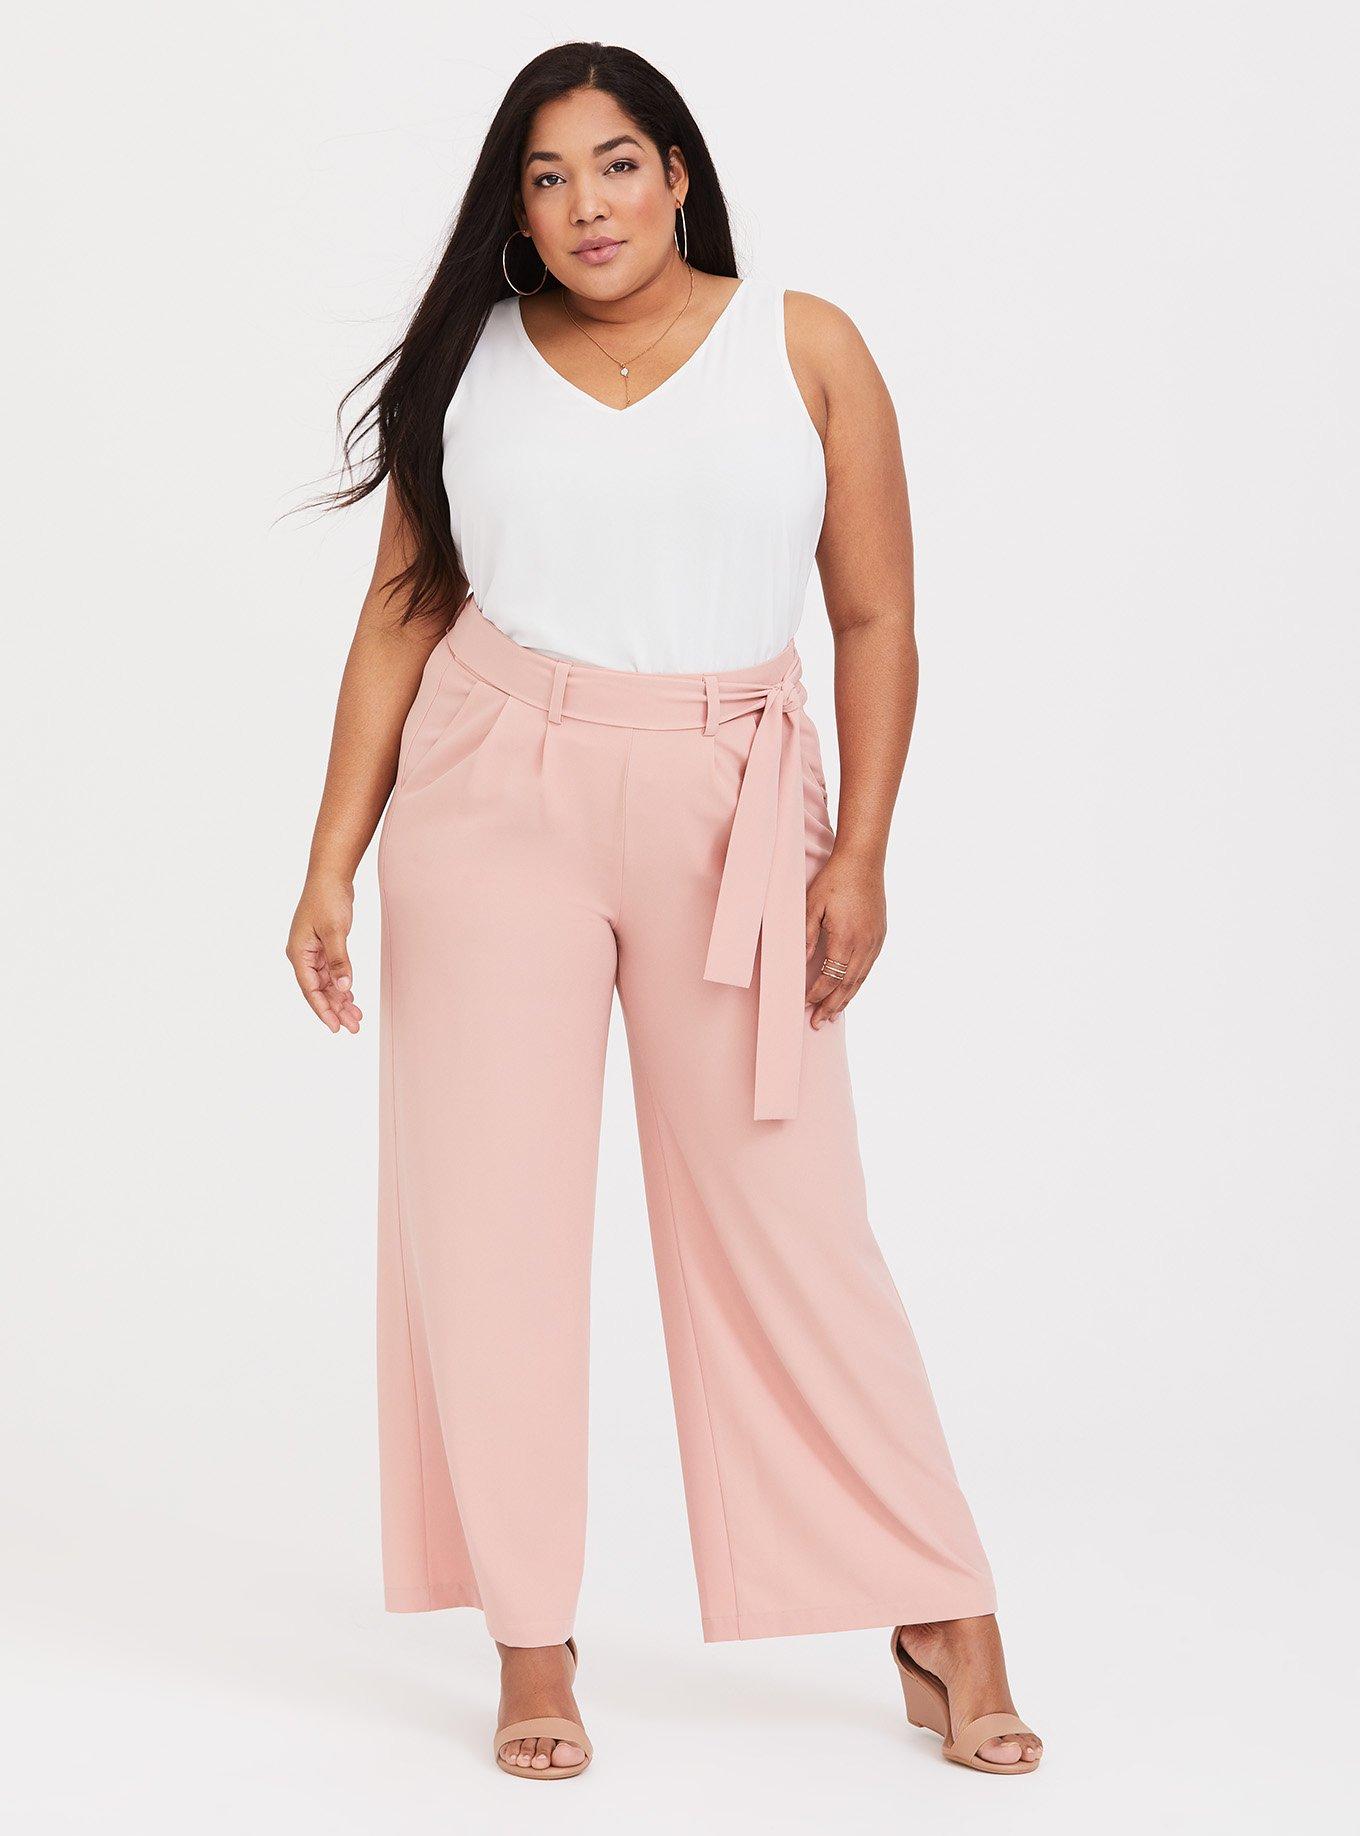 The Raleigh High Waist Metallic Pants In Pink Curves • Impressions